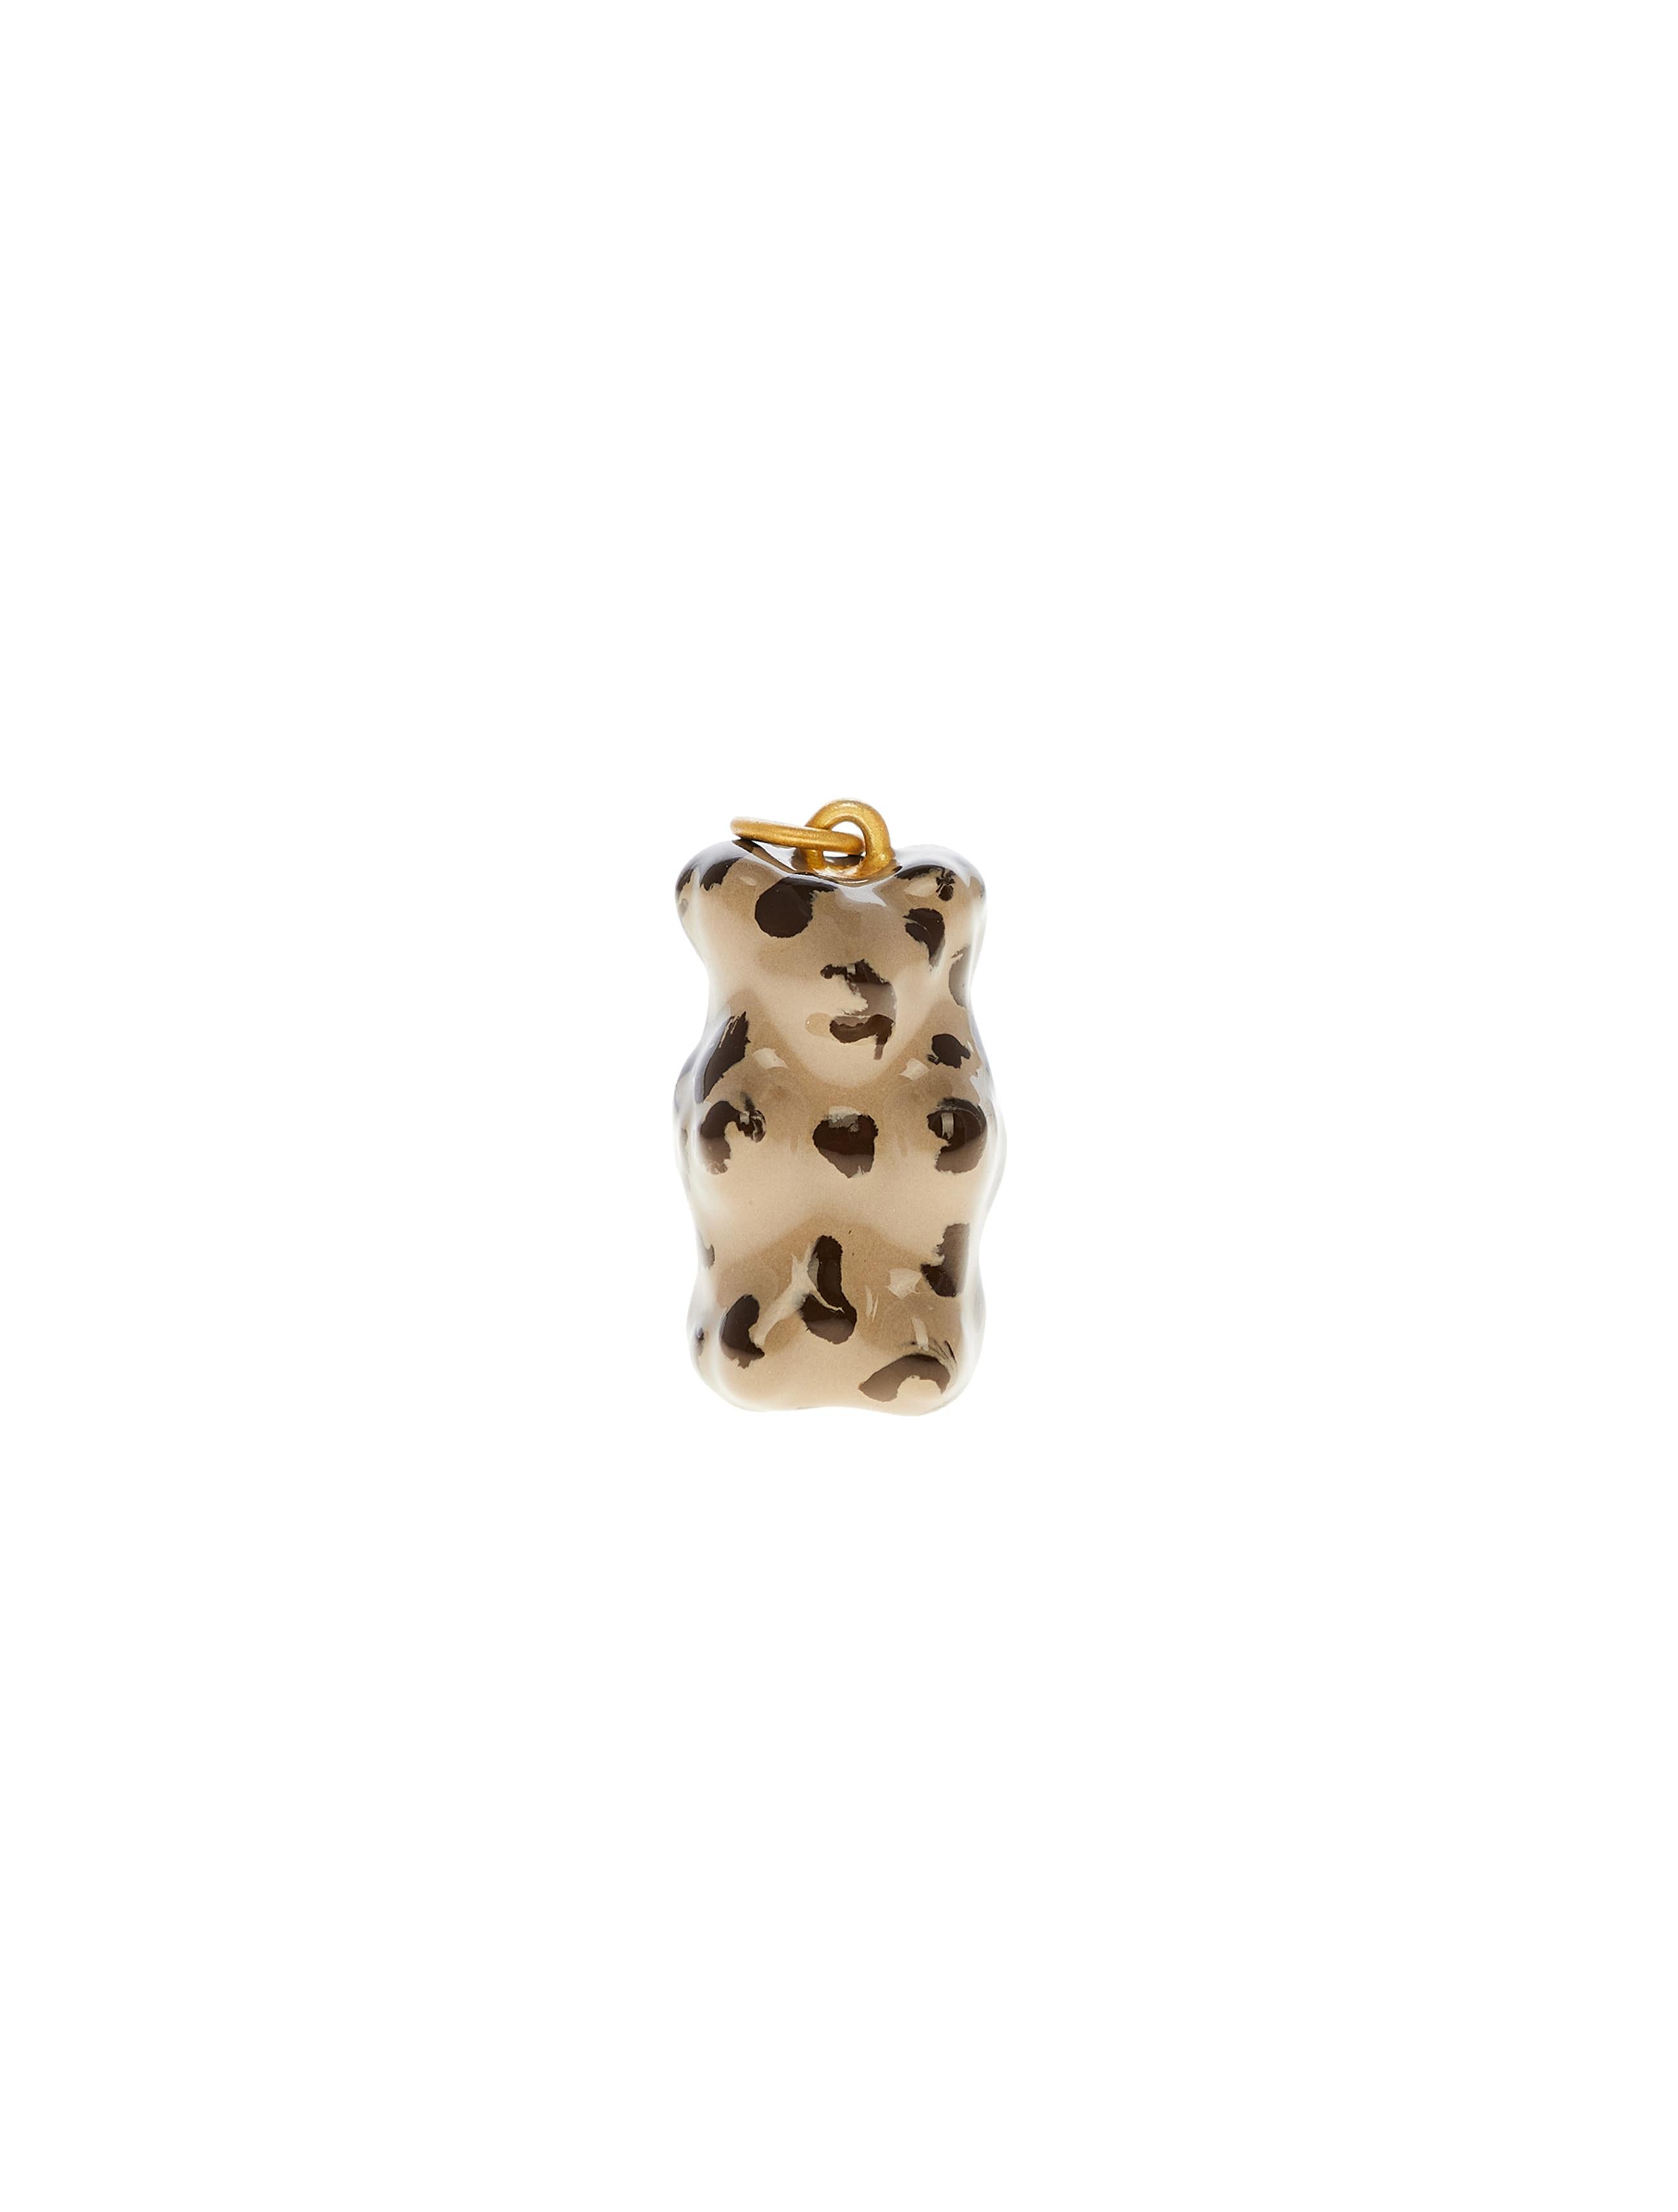 Grape  Gummy bear 


18K gold plated silver gummy bear pendant on silver gold plated chain with transparent opaque enamel coverage. 

The Gummy Project by Maggoosh is a capsule collection inspired by the designer's life in New York City and her